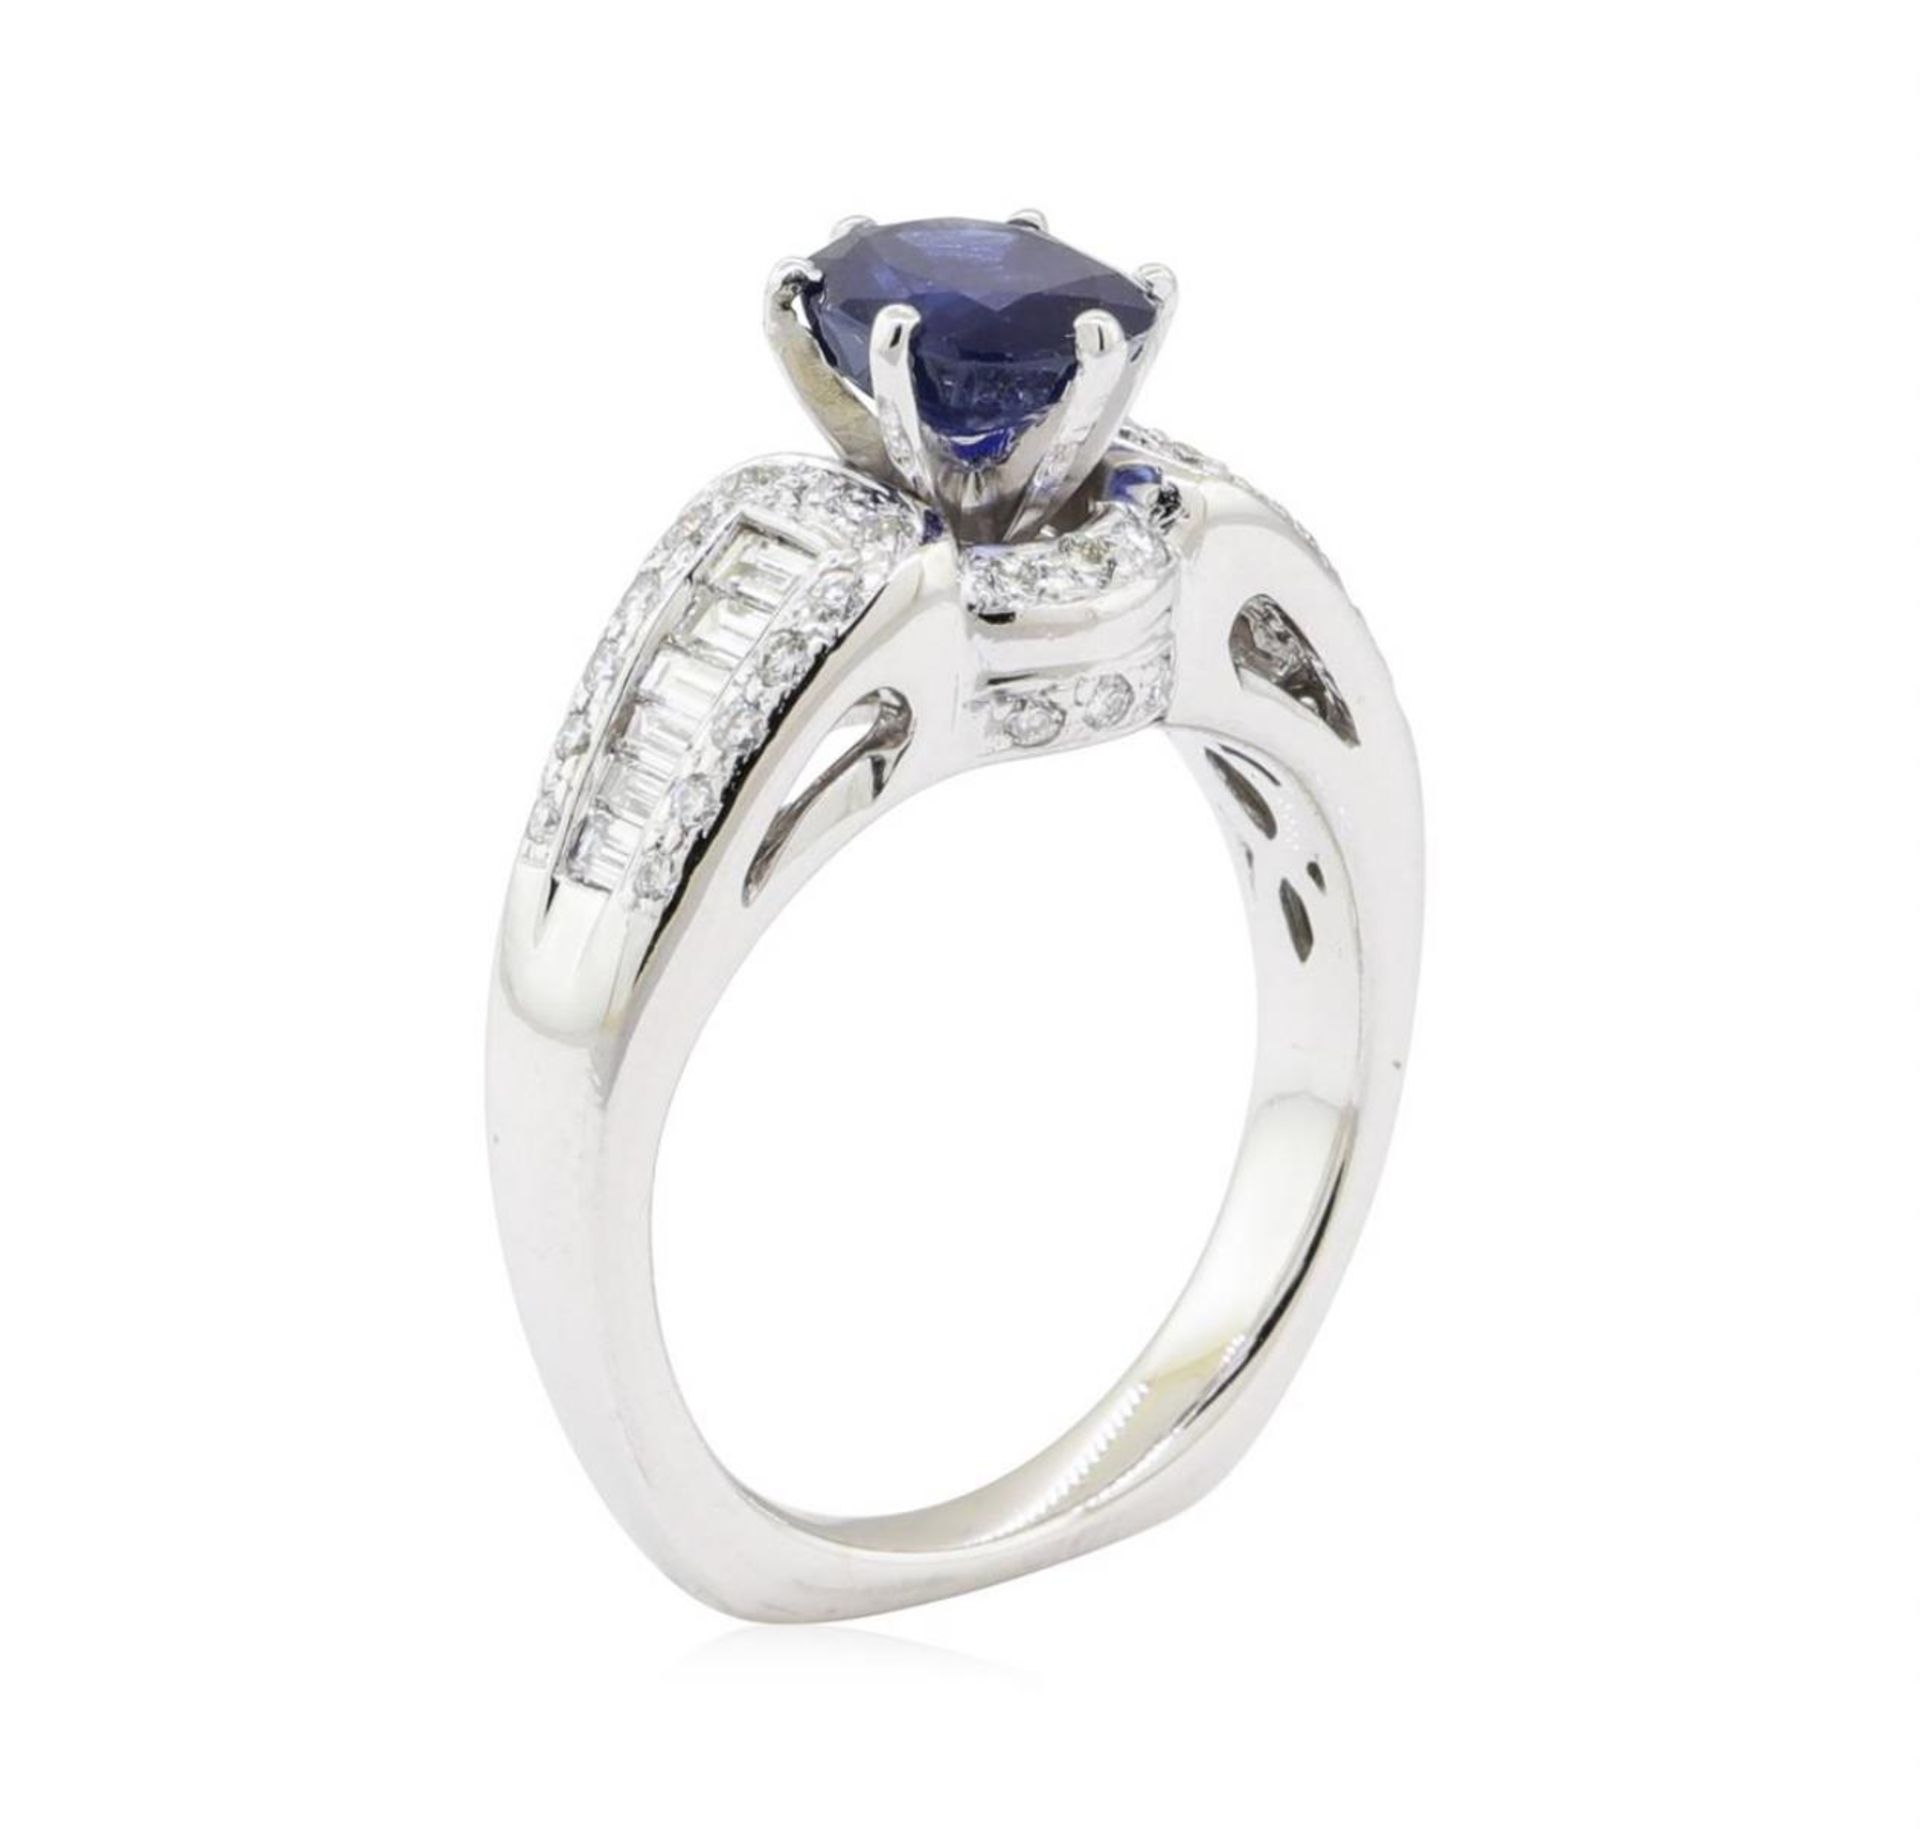 2.01 ctw Sapphire and Diamond Ring - 14KT White Gold - Image 4 of 5